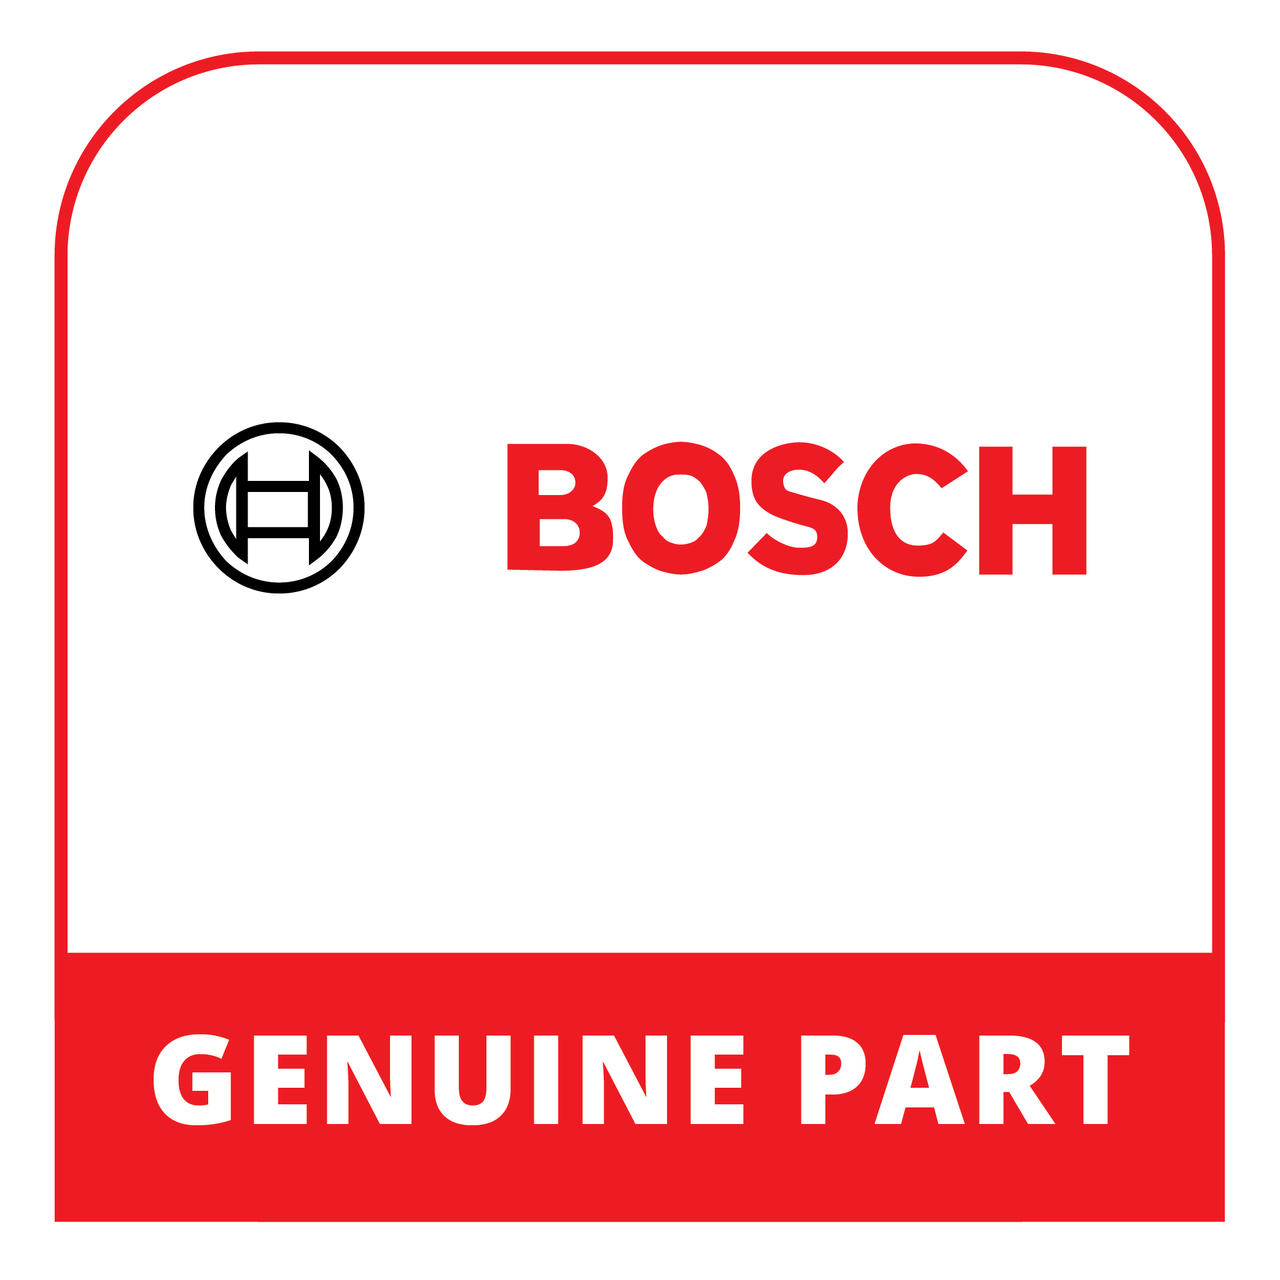 Bosch (Thermador) 10015123 - Ring - Genuine Bosch (Thermador) Part